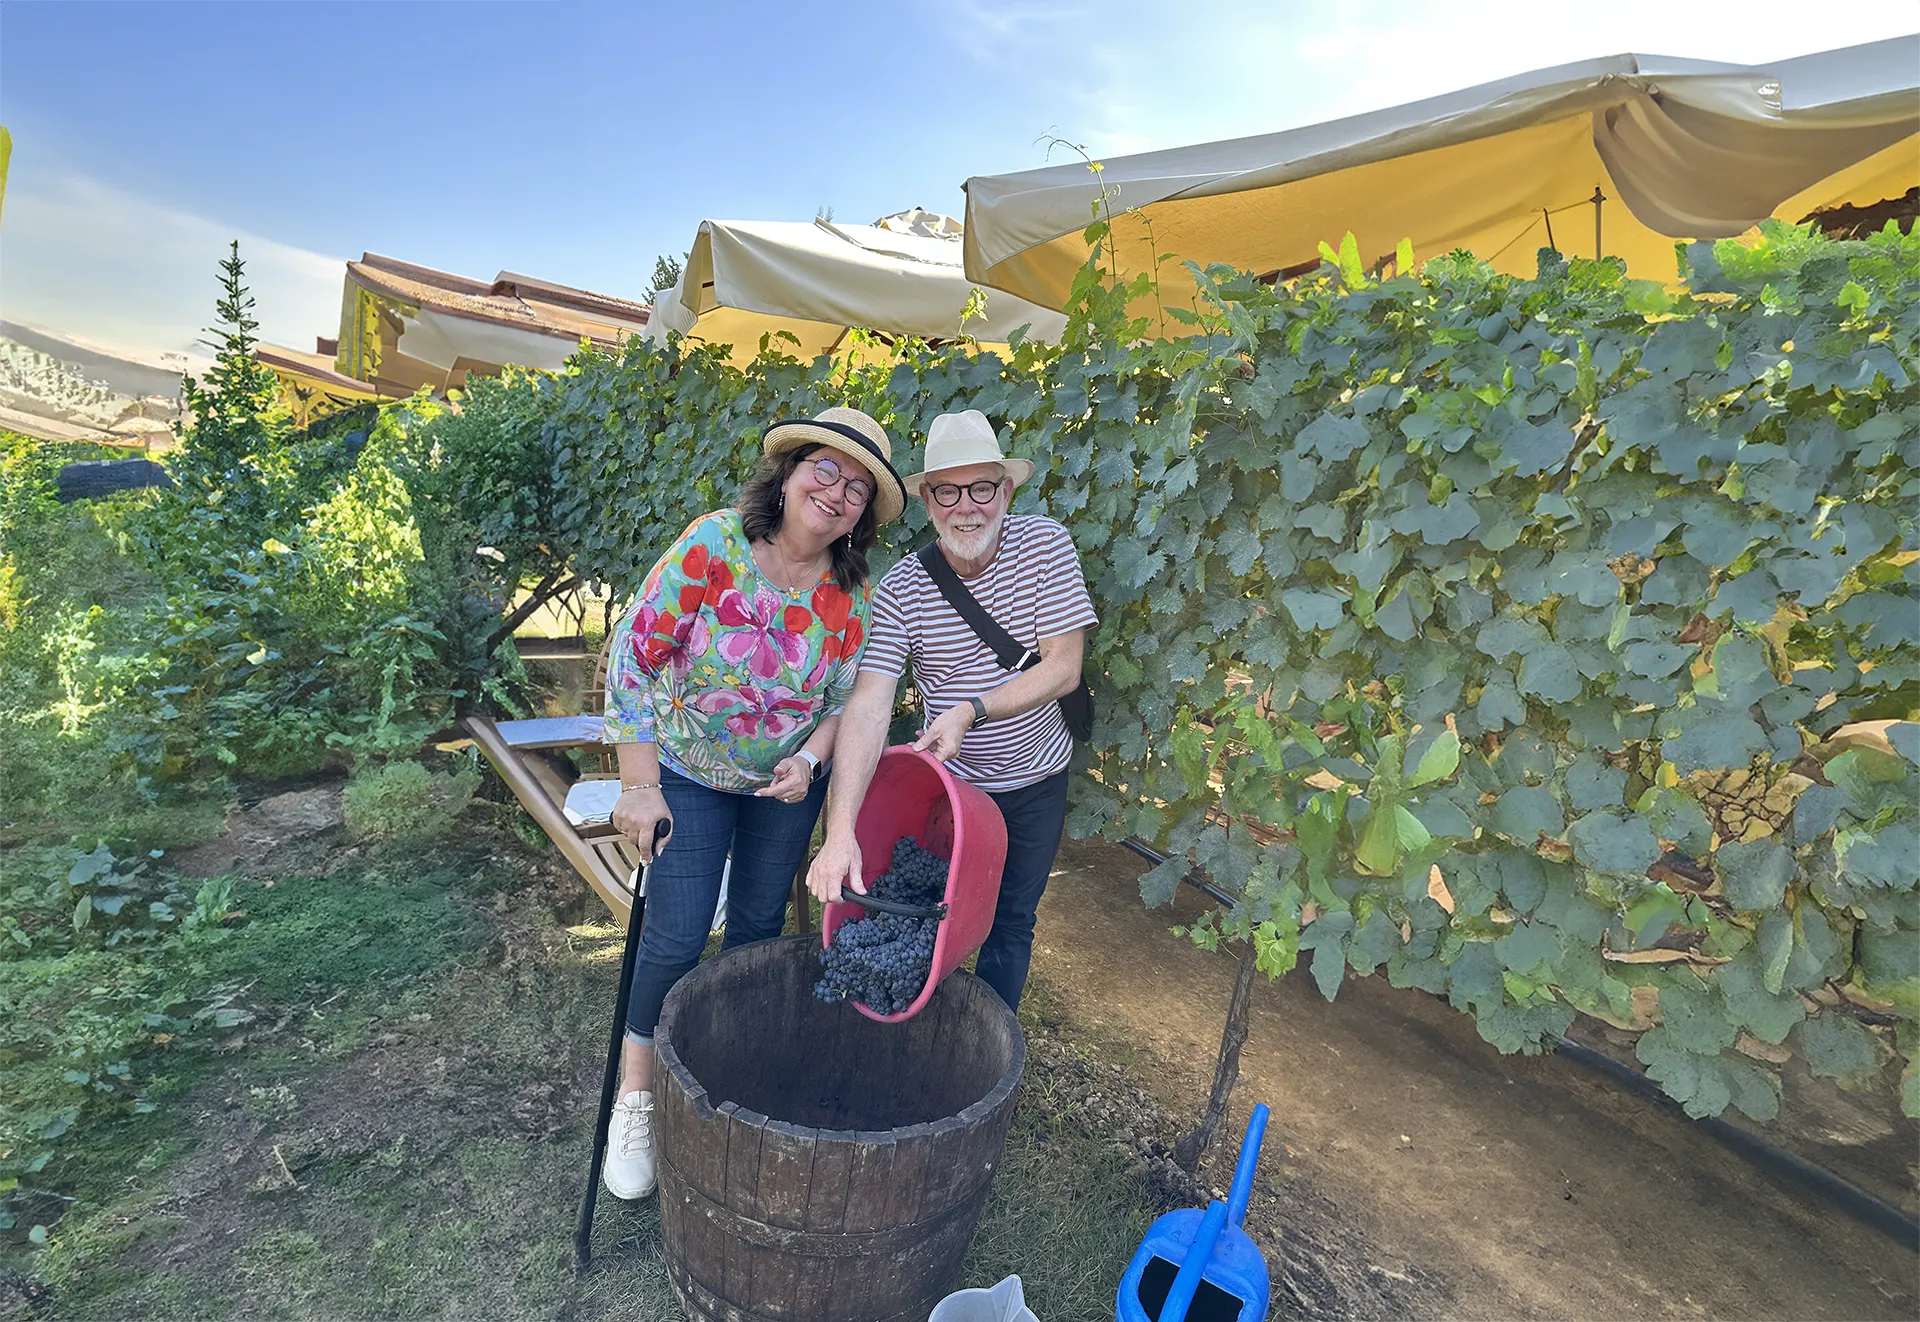 Mark Morin, the Happy Traveler and his wife Danielle harvesting grapes in Tuscany